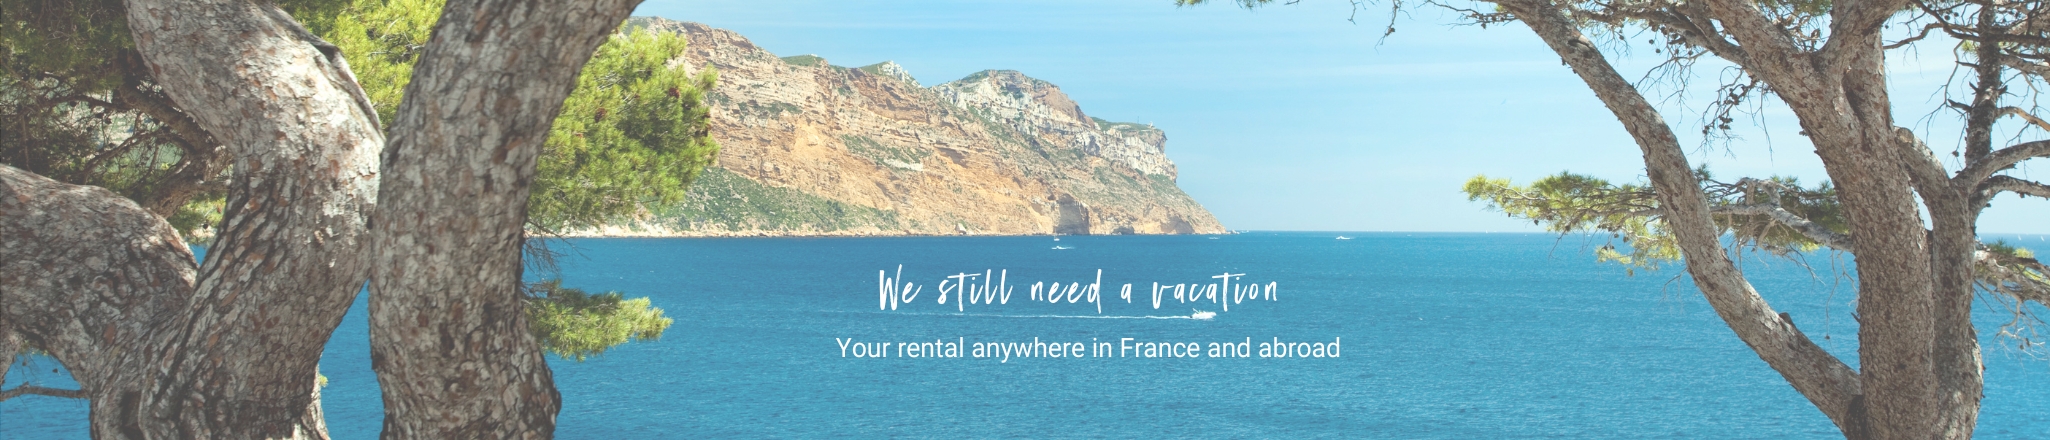 Your rental anywhere in France and abroad